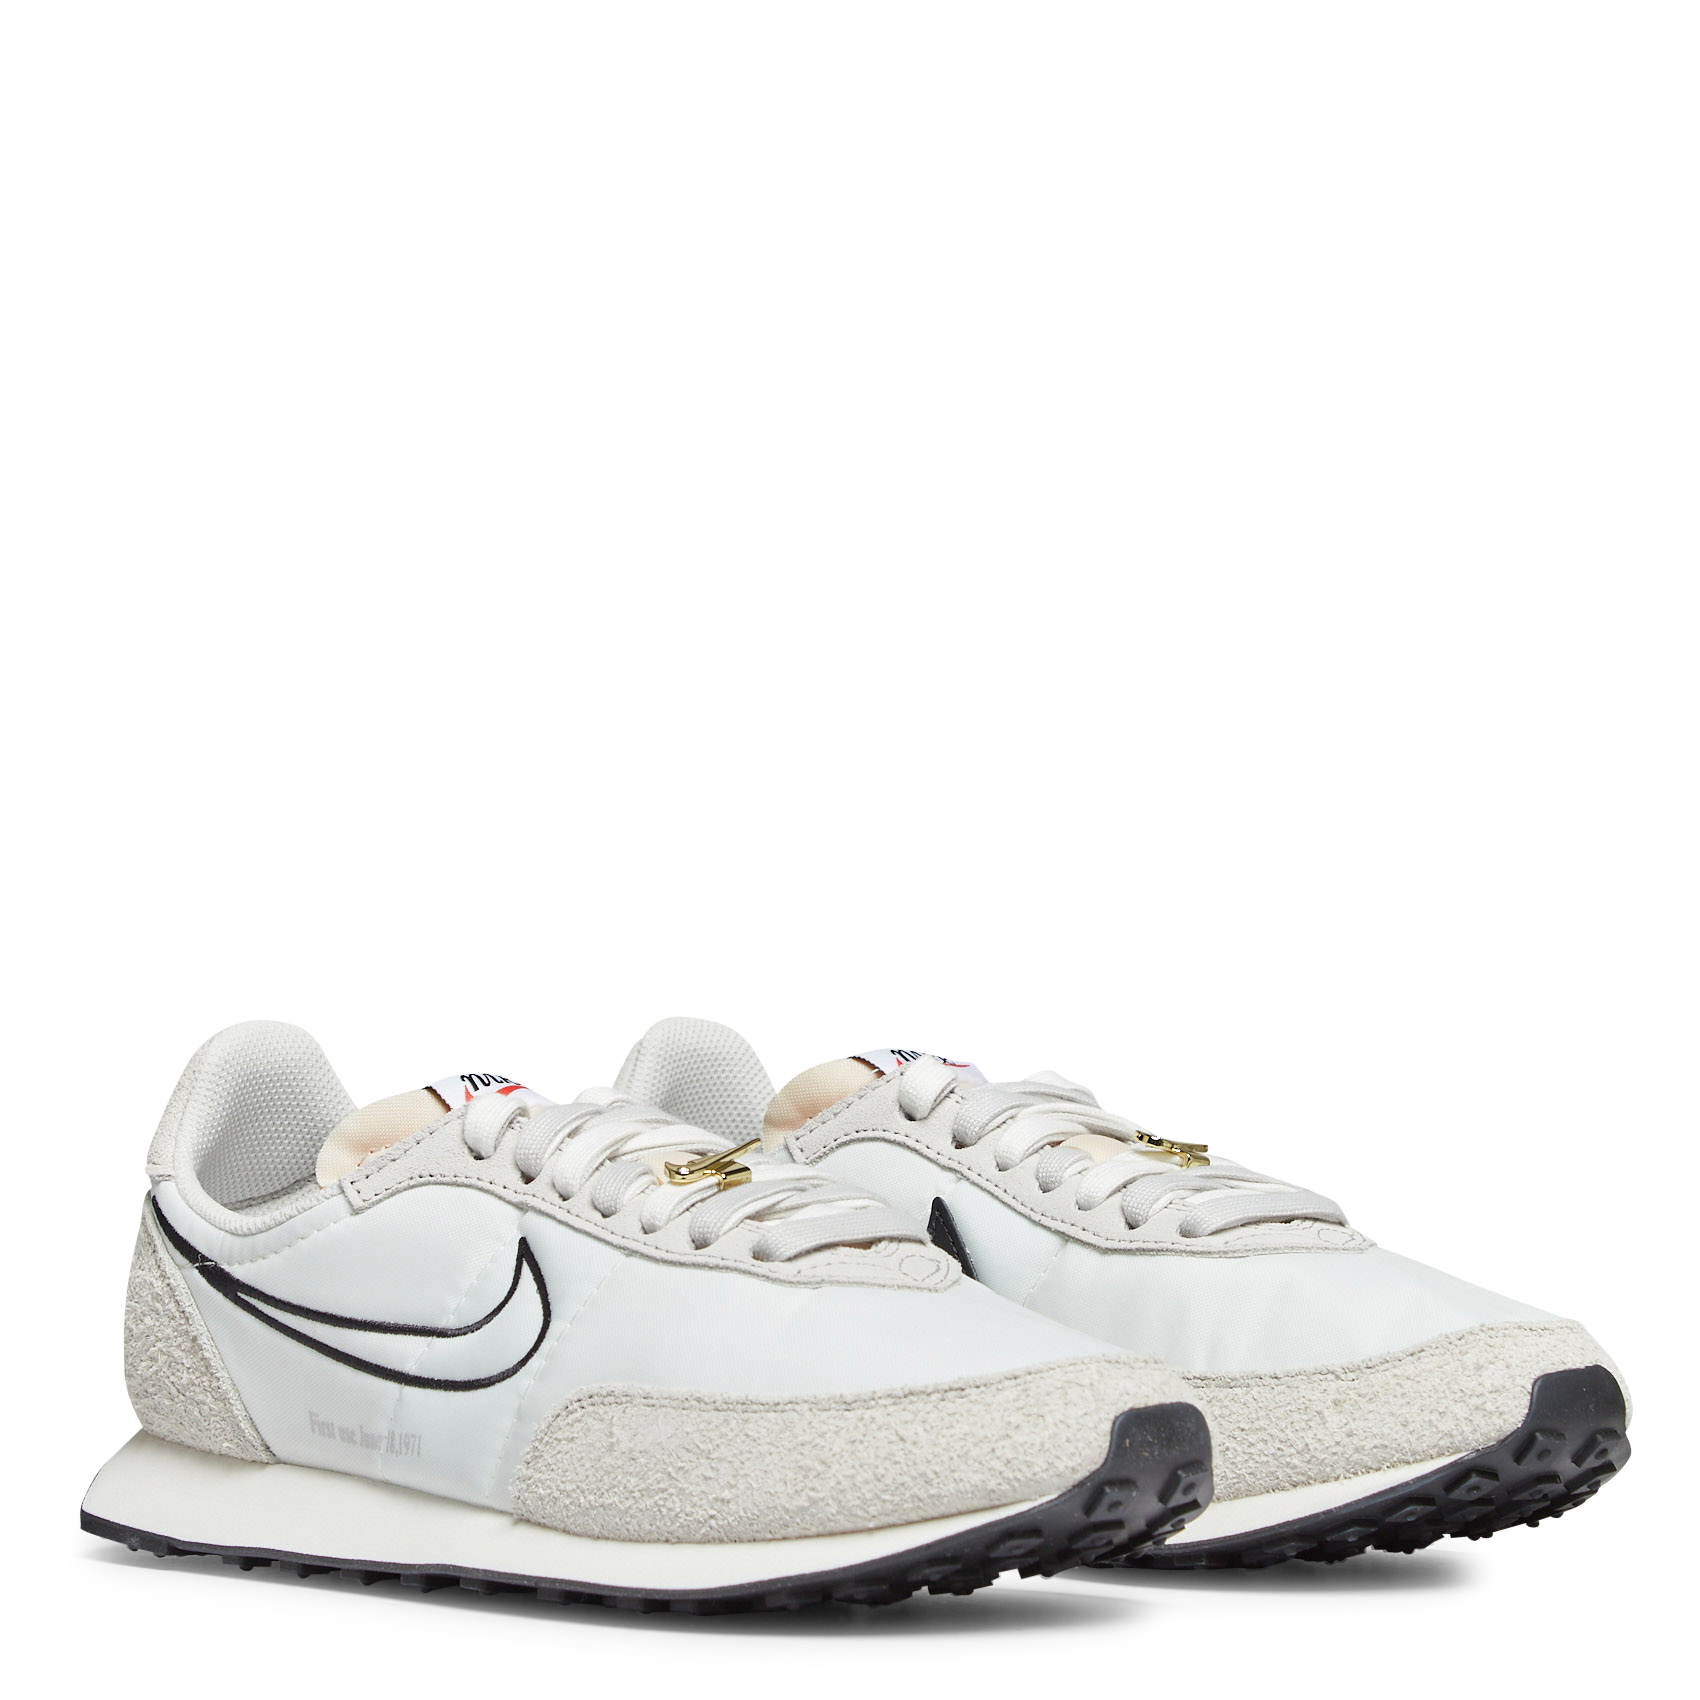 Nike Waffle Trainer 2 Sneakers Sail 